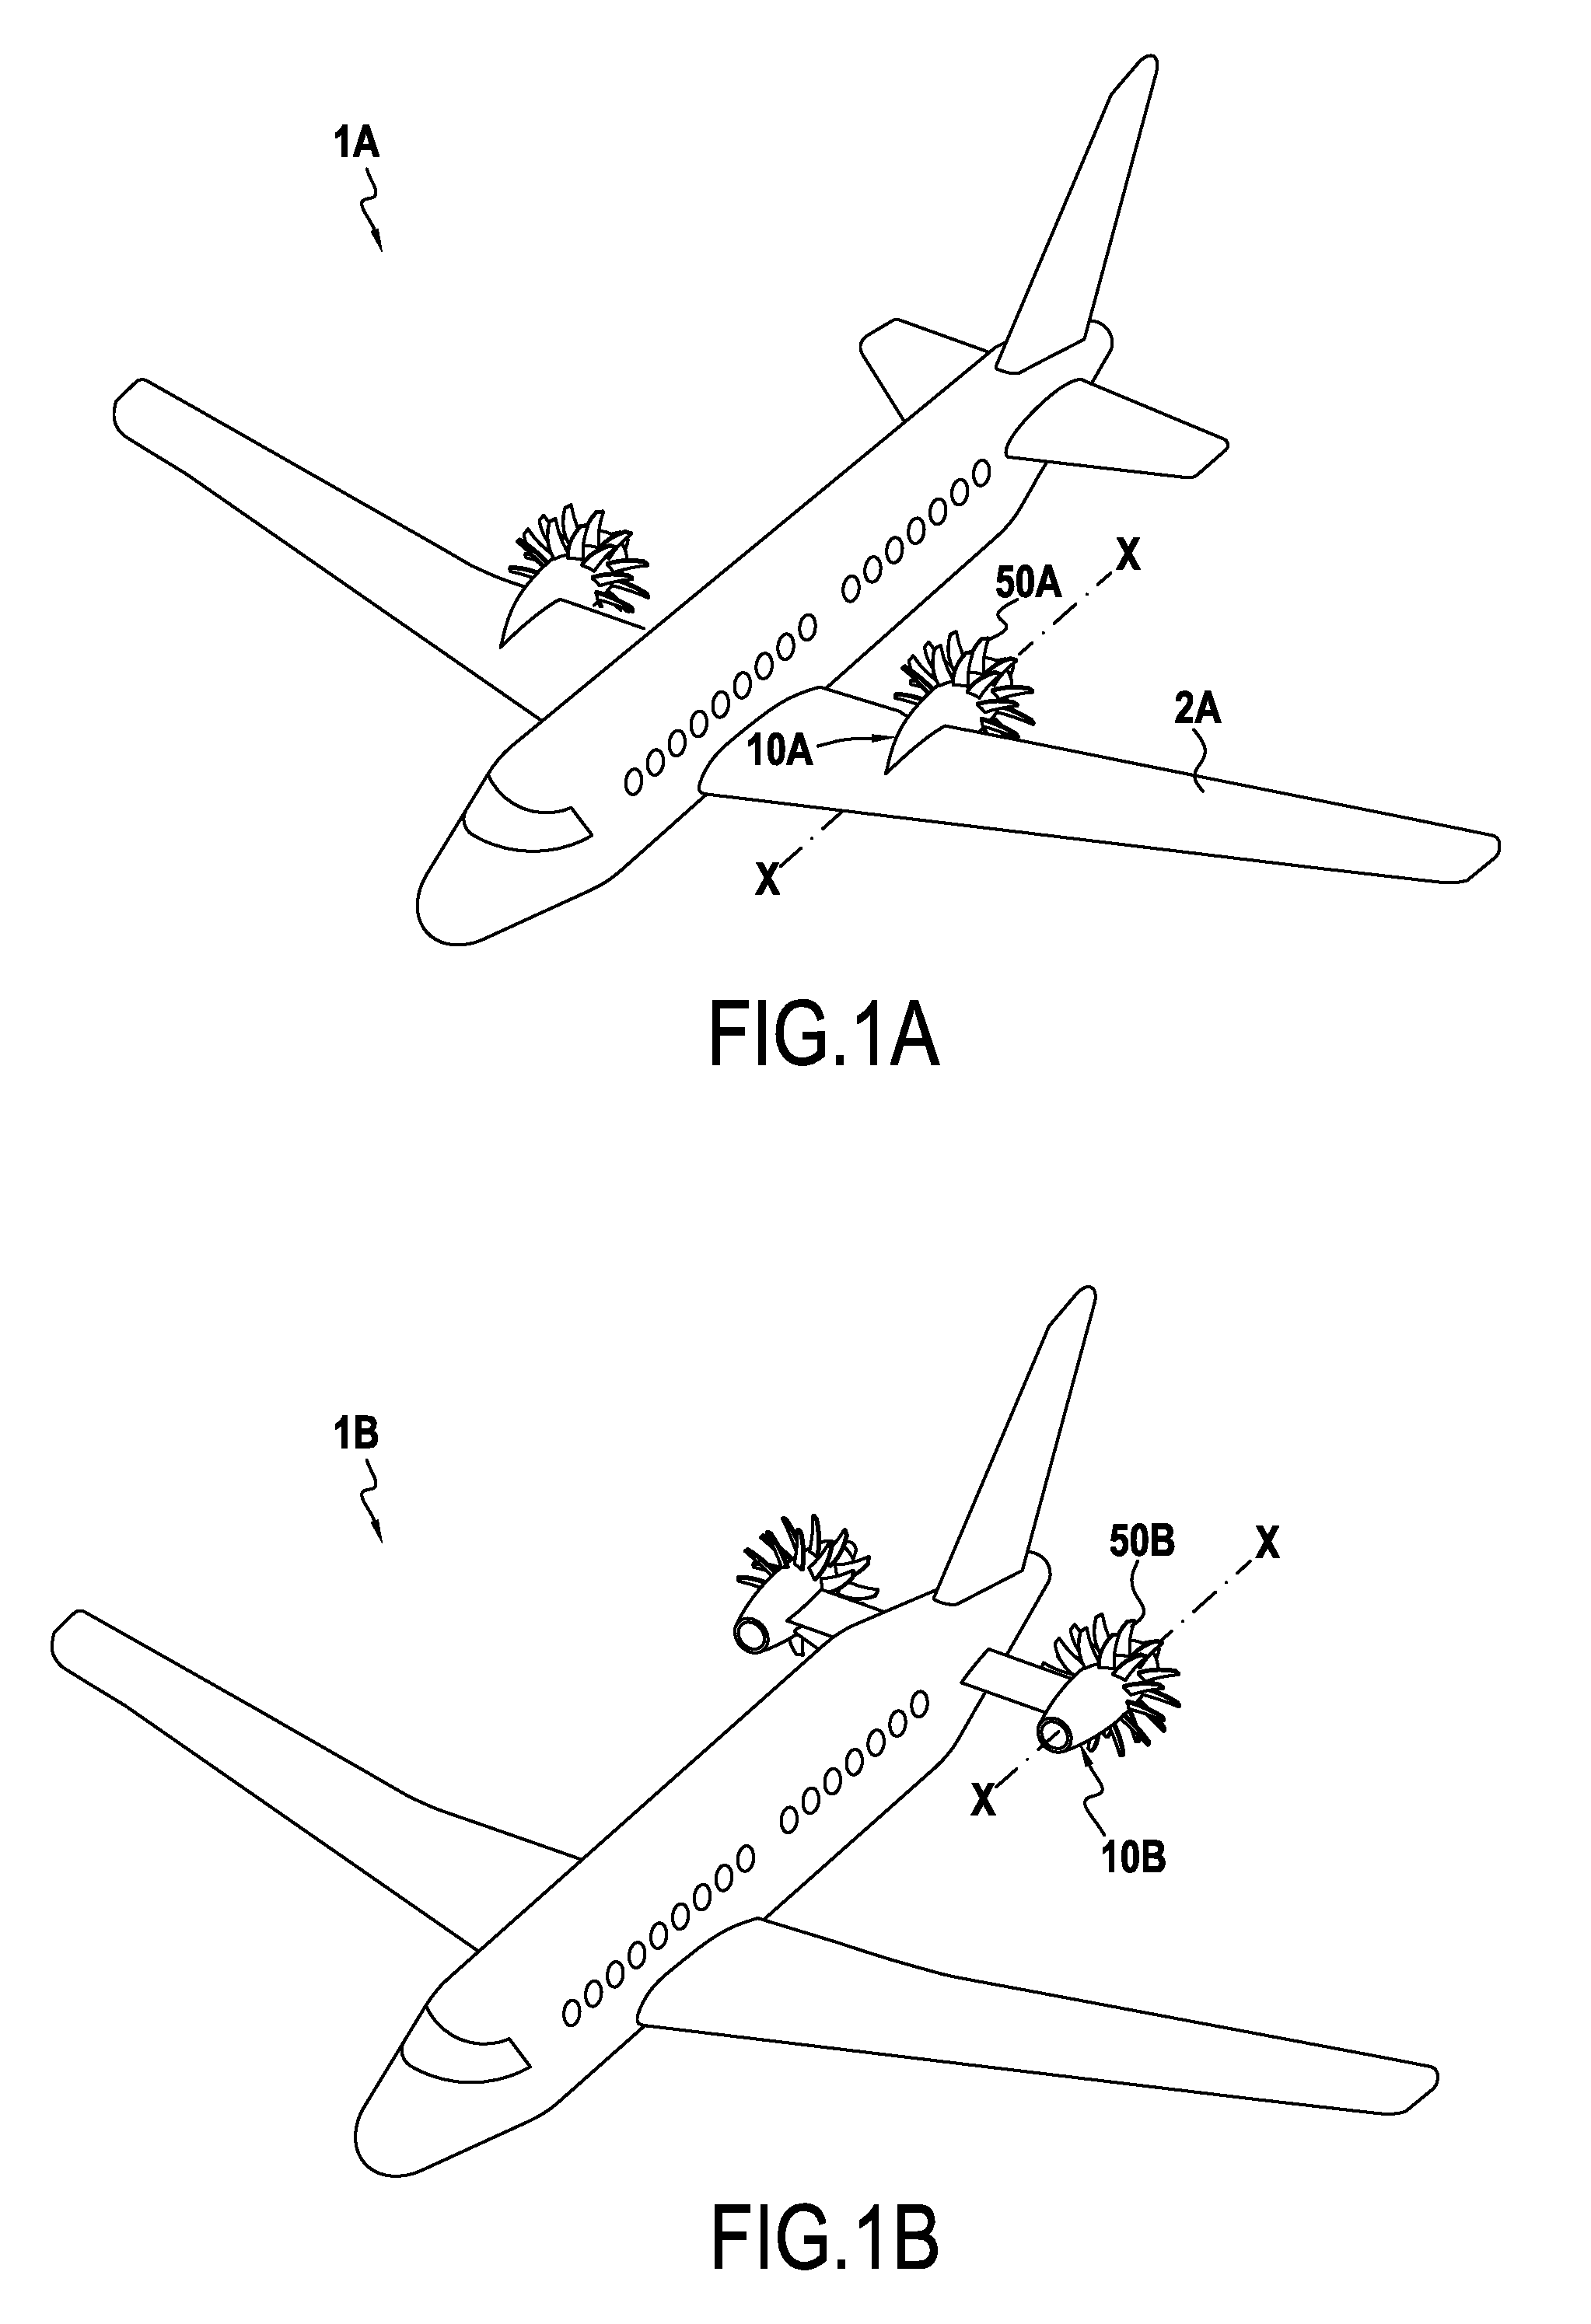 Remote connection system for an aircraft